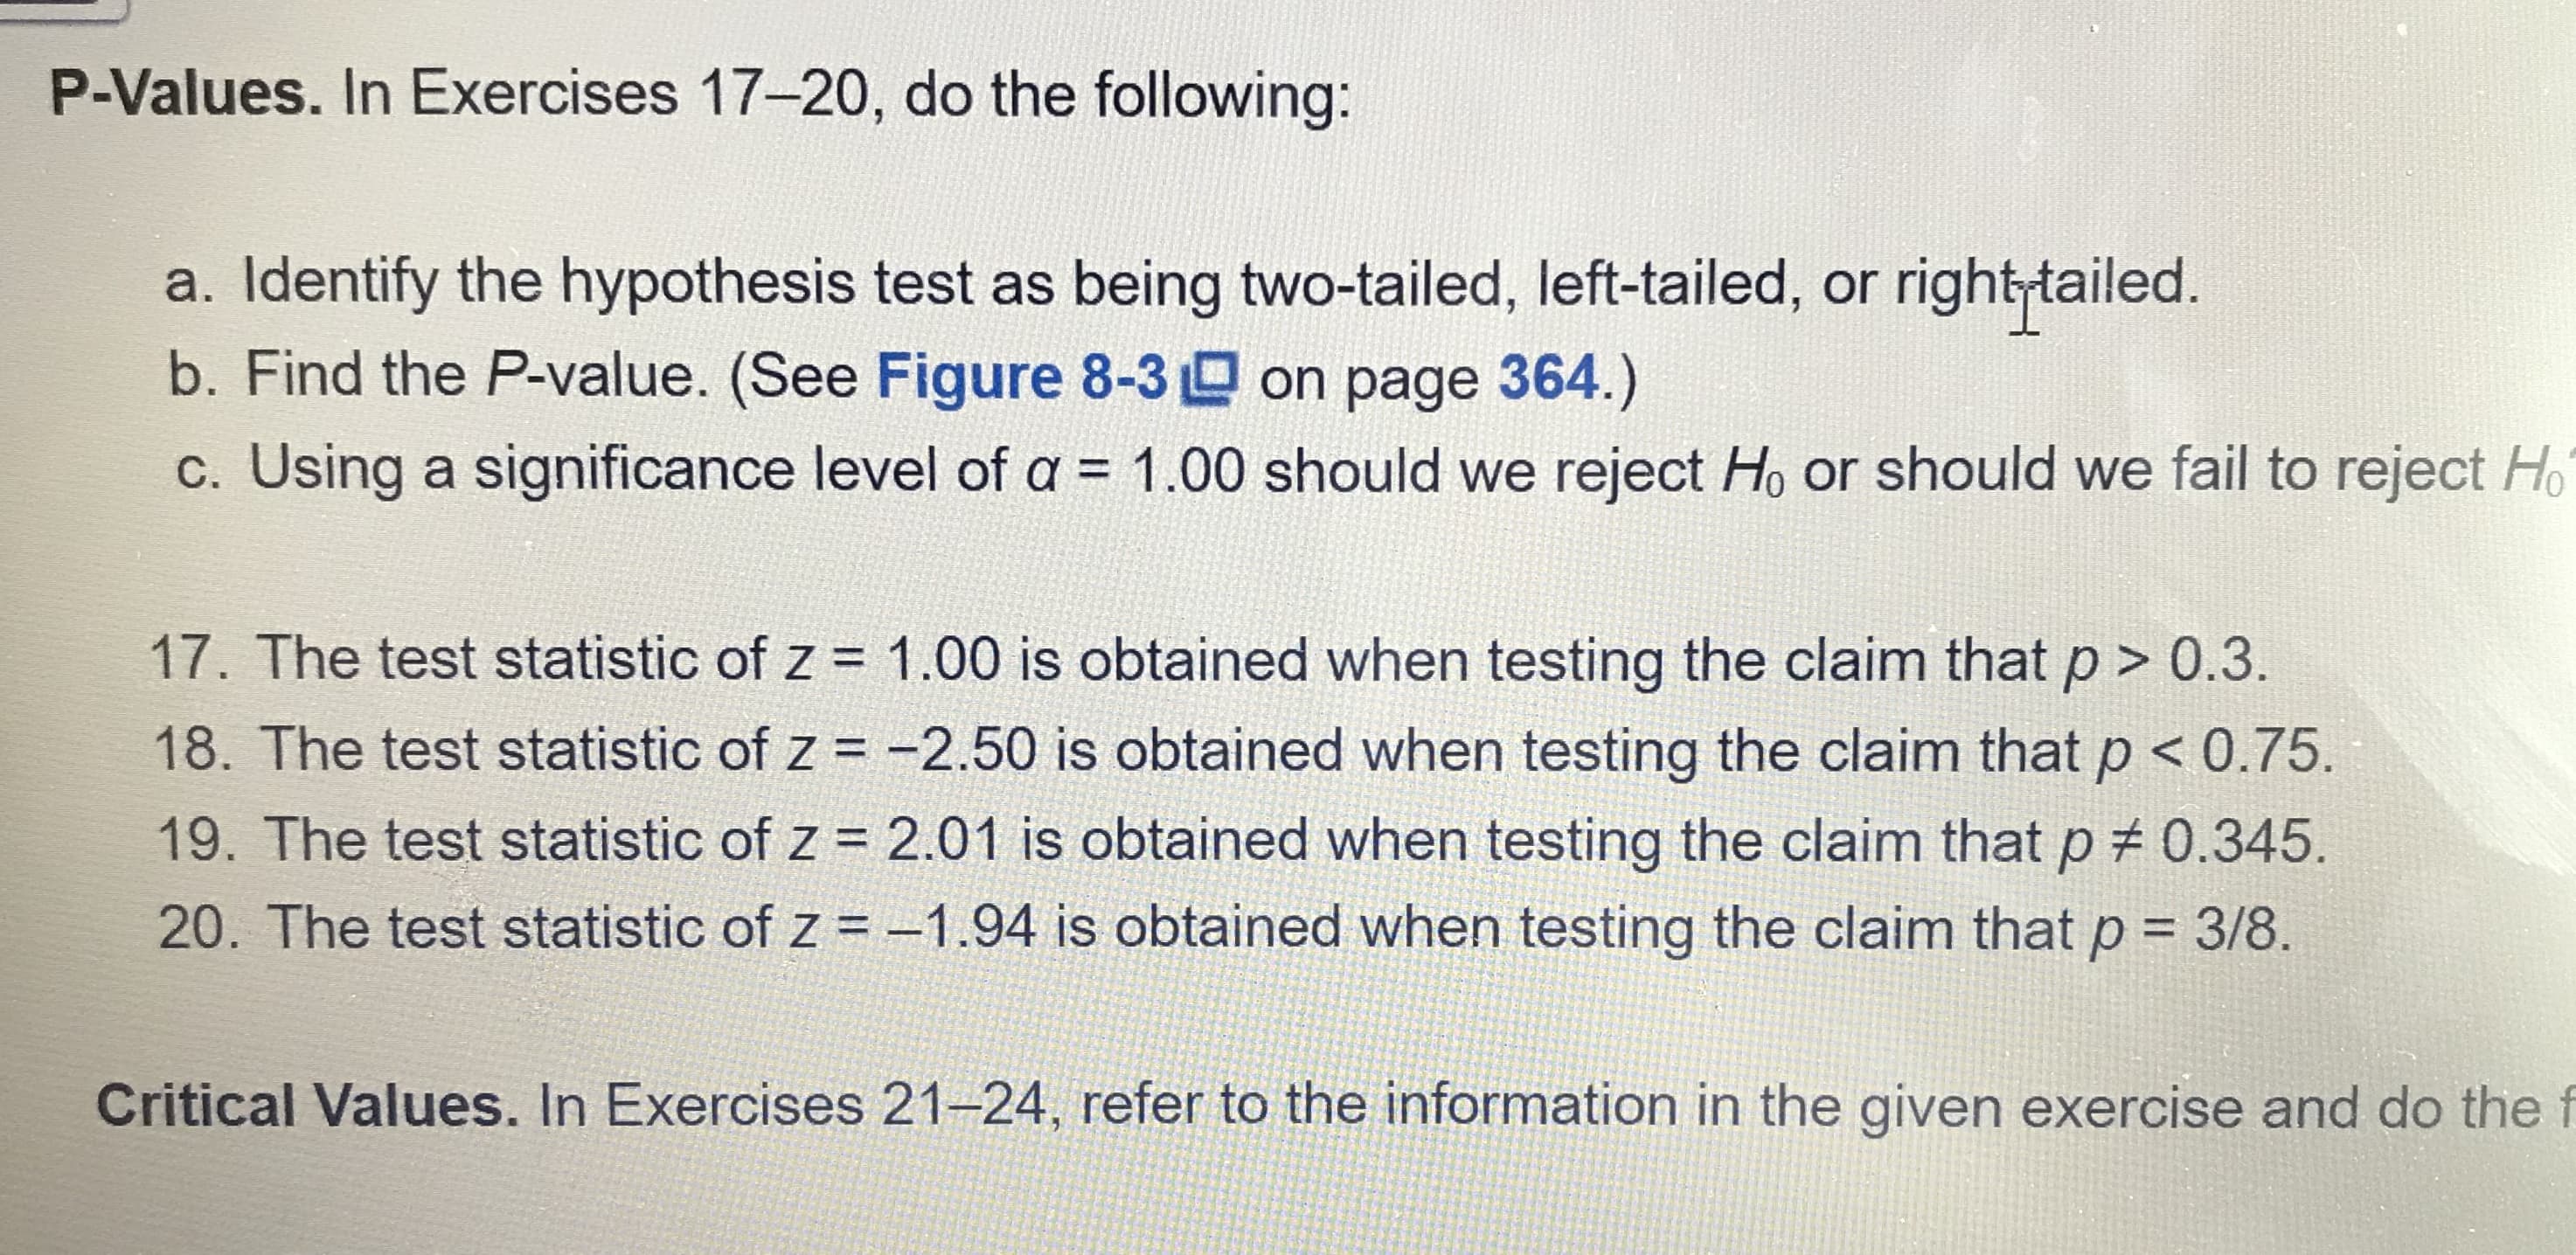 a. Identify the hypothesis test as being two-tailed, left-tailed, or right tailed.
b. Find the P-value. (See Figure 8-3 on page 364.)
c. Using a significance level of a = 1.00 should we reject Ho or should we fail to reject Ho
